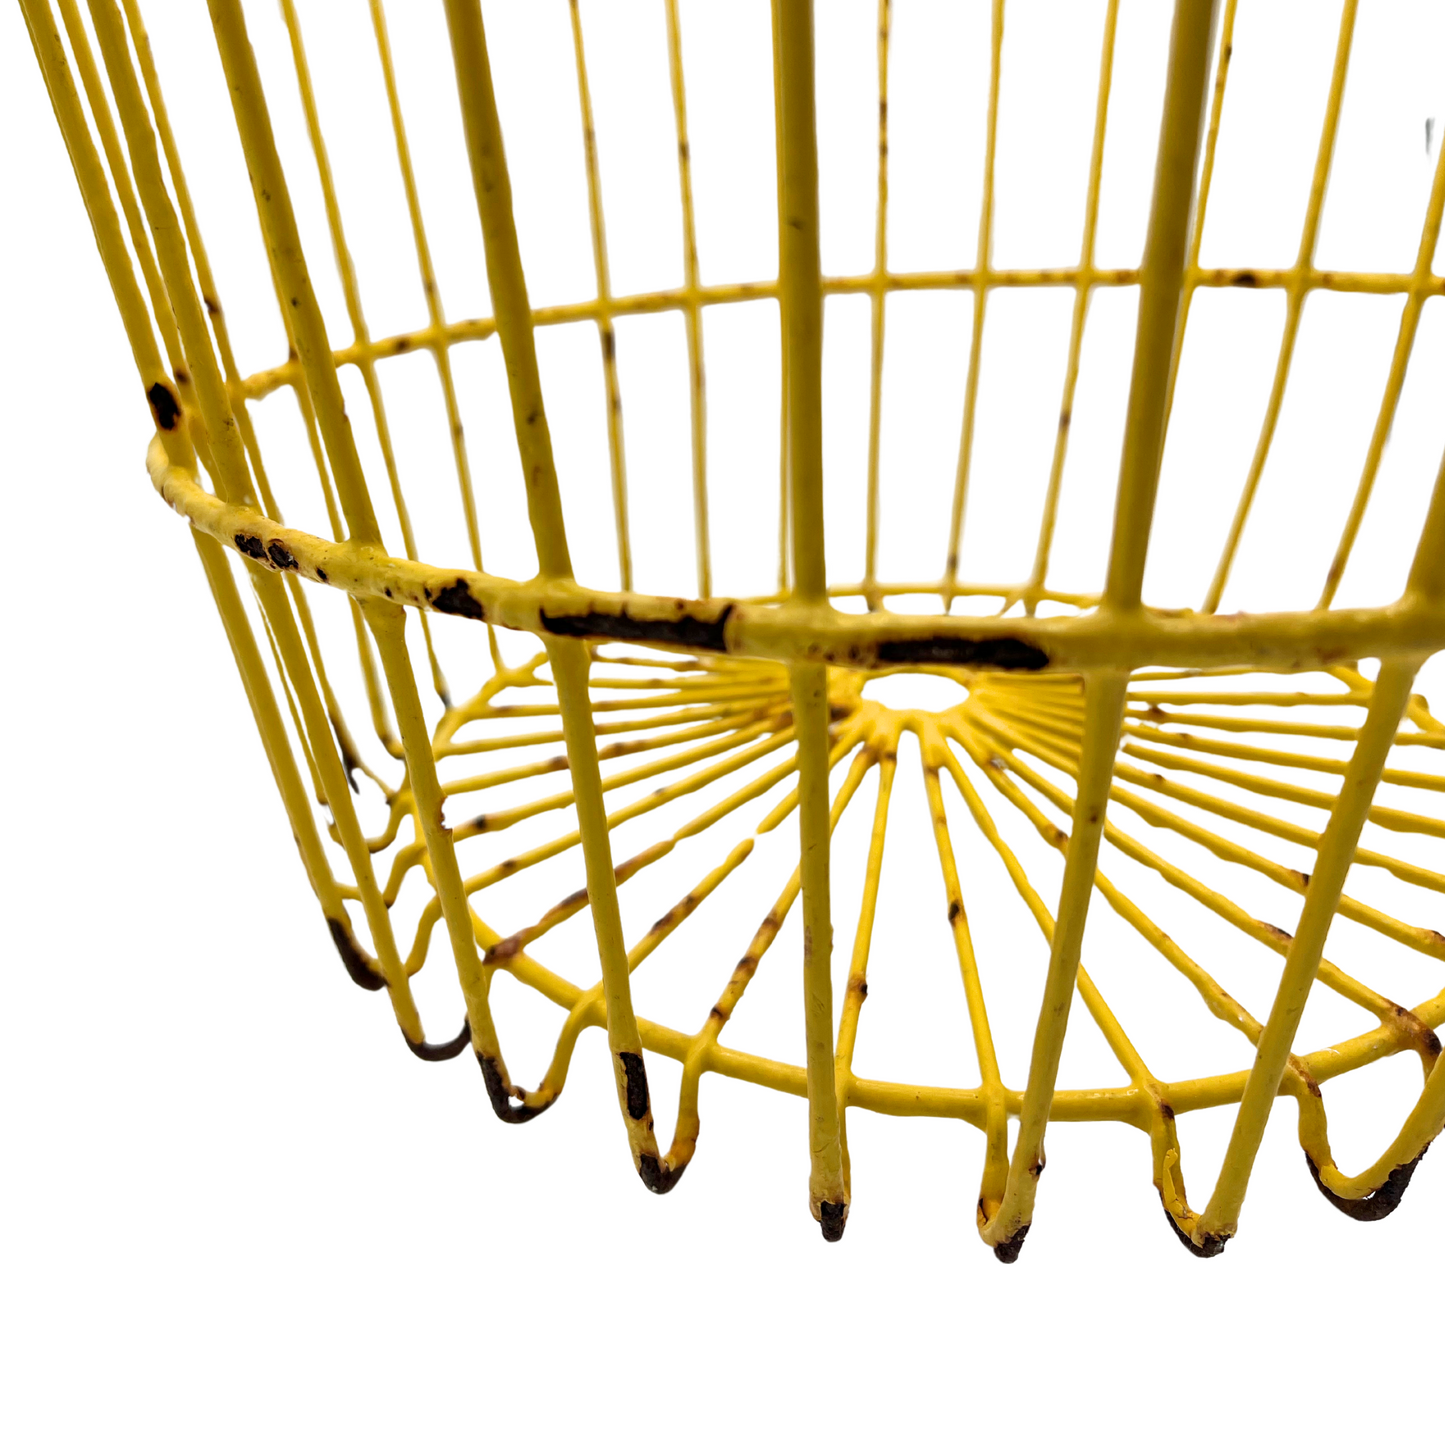 salvaged yellow clam basket